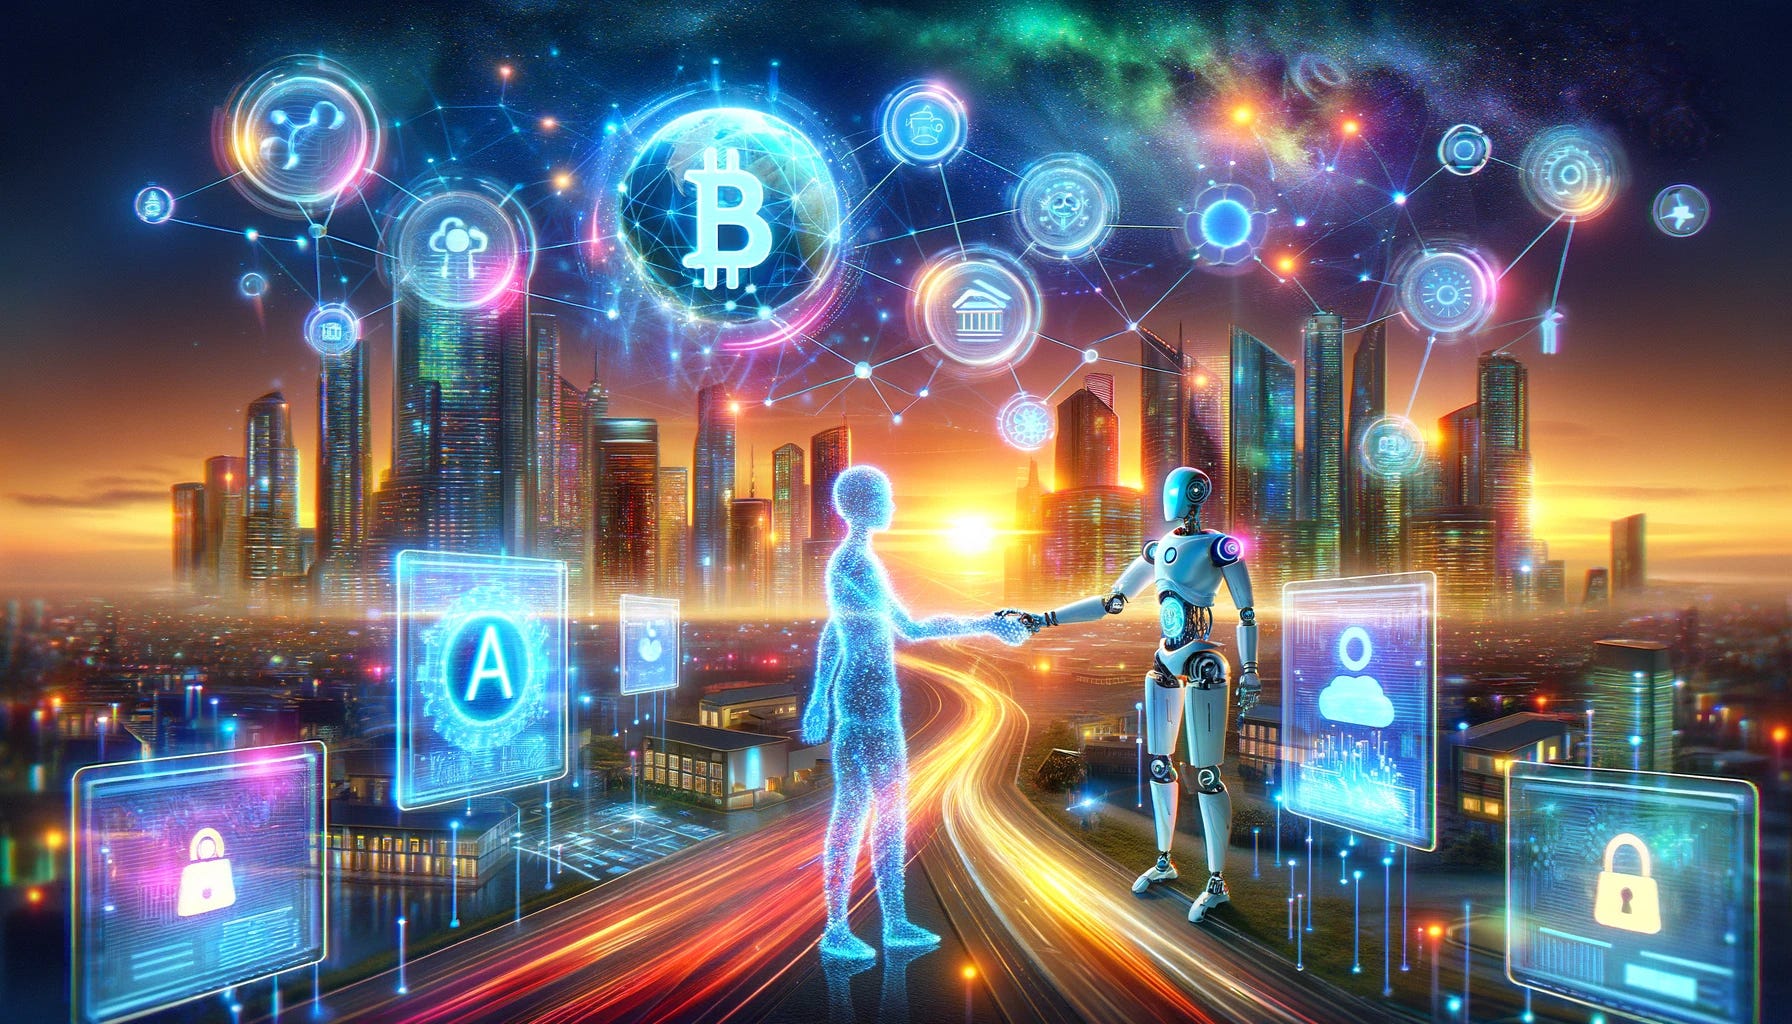 What Could the Future of AI and Crypto Look Like?